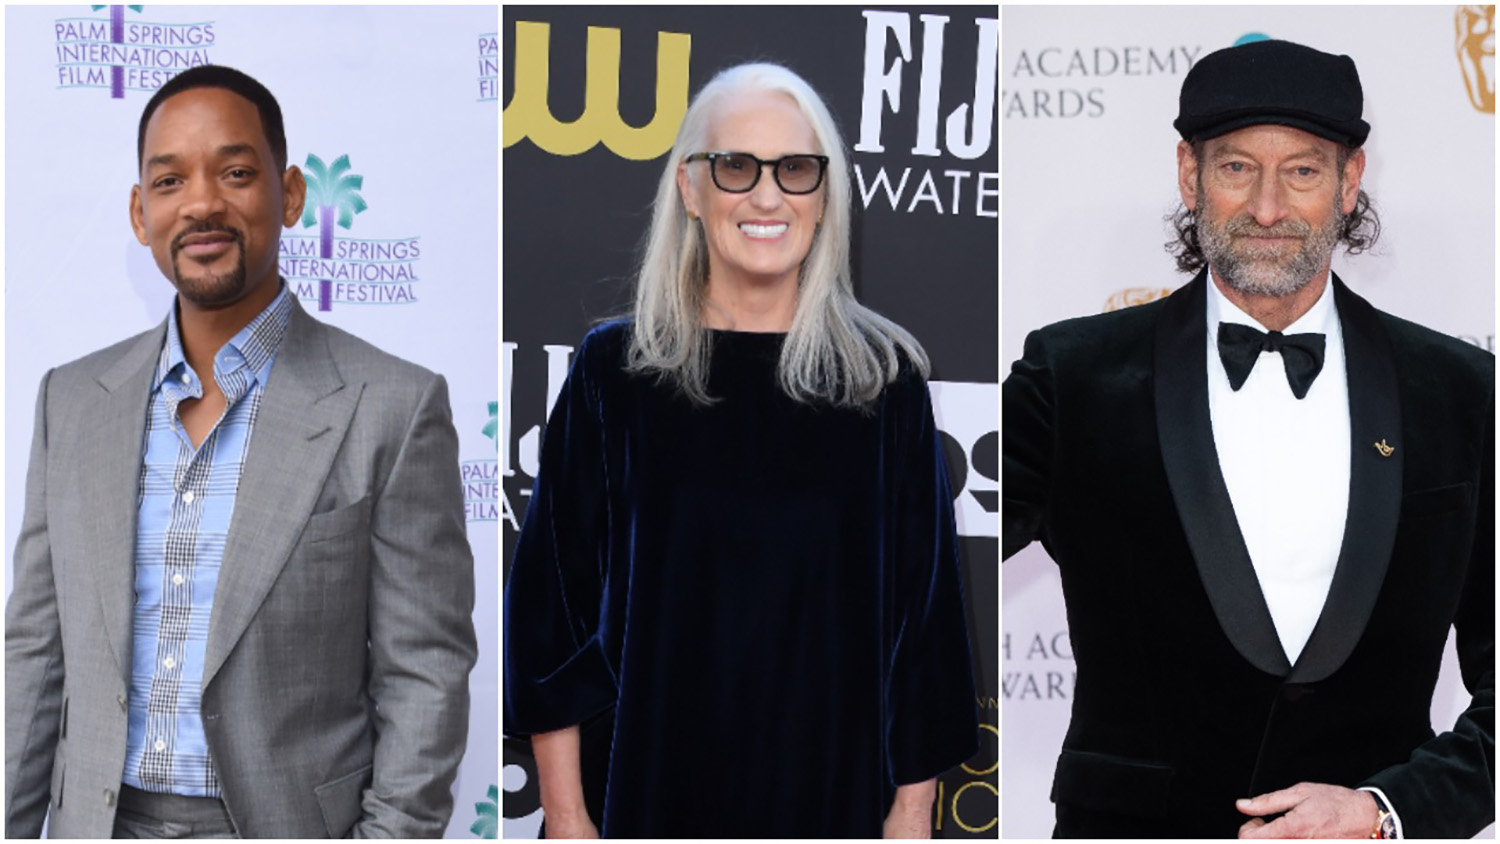 Oscars 2022 nominees who could make history: Will Smith, Jane Campion, and Troy Kotsur